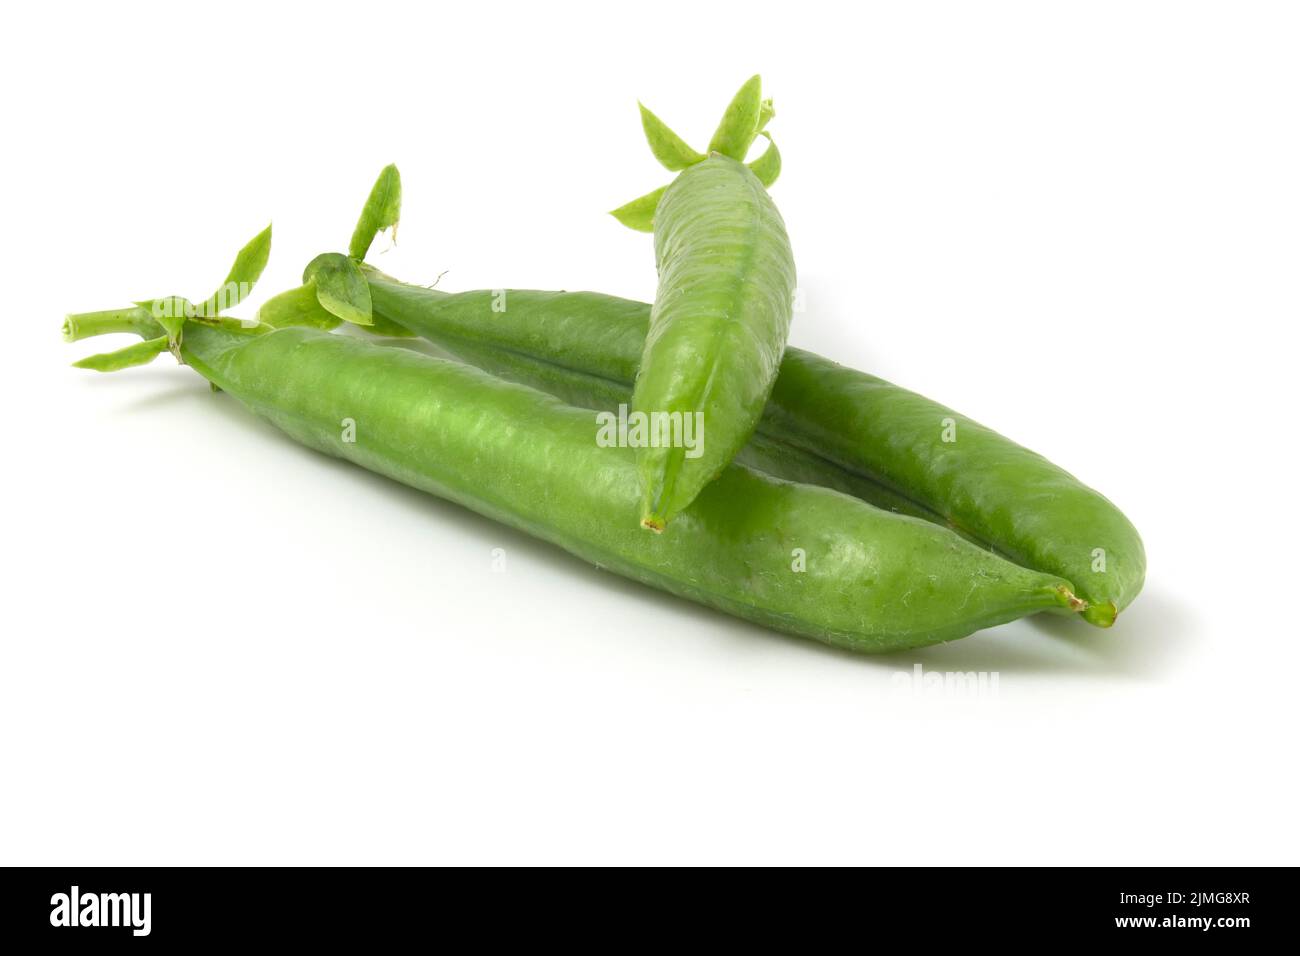 Sweet pea pods isolated on white background. Vegetarian food. Stock Photo